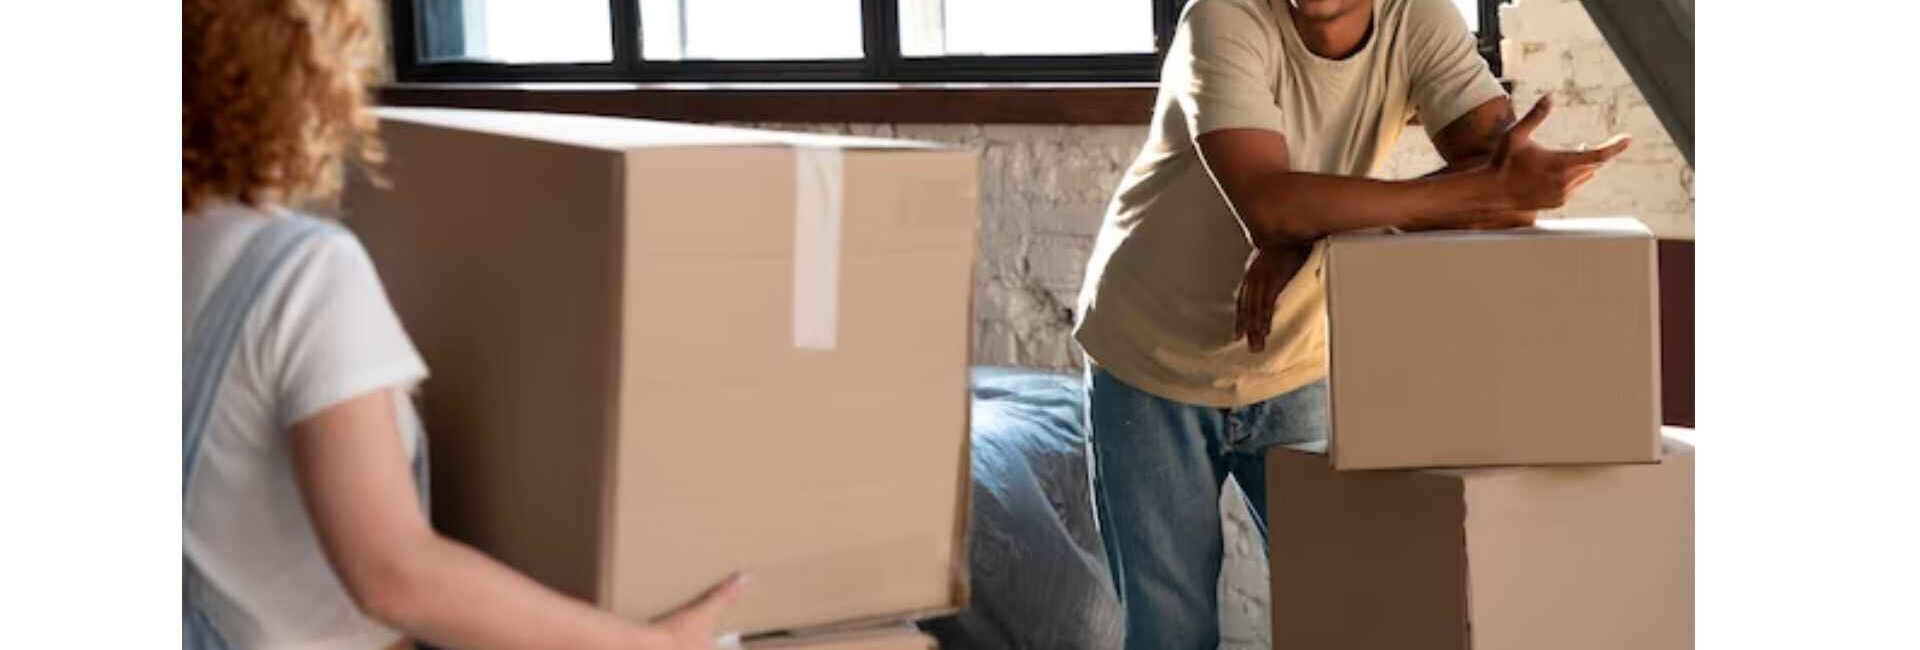 Boxigo Packers and Movers - Best Packers and Movers in Noida